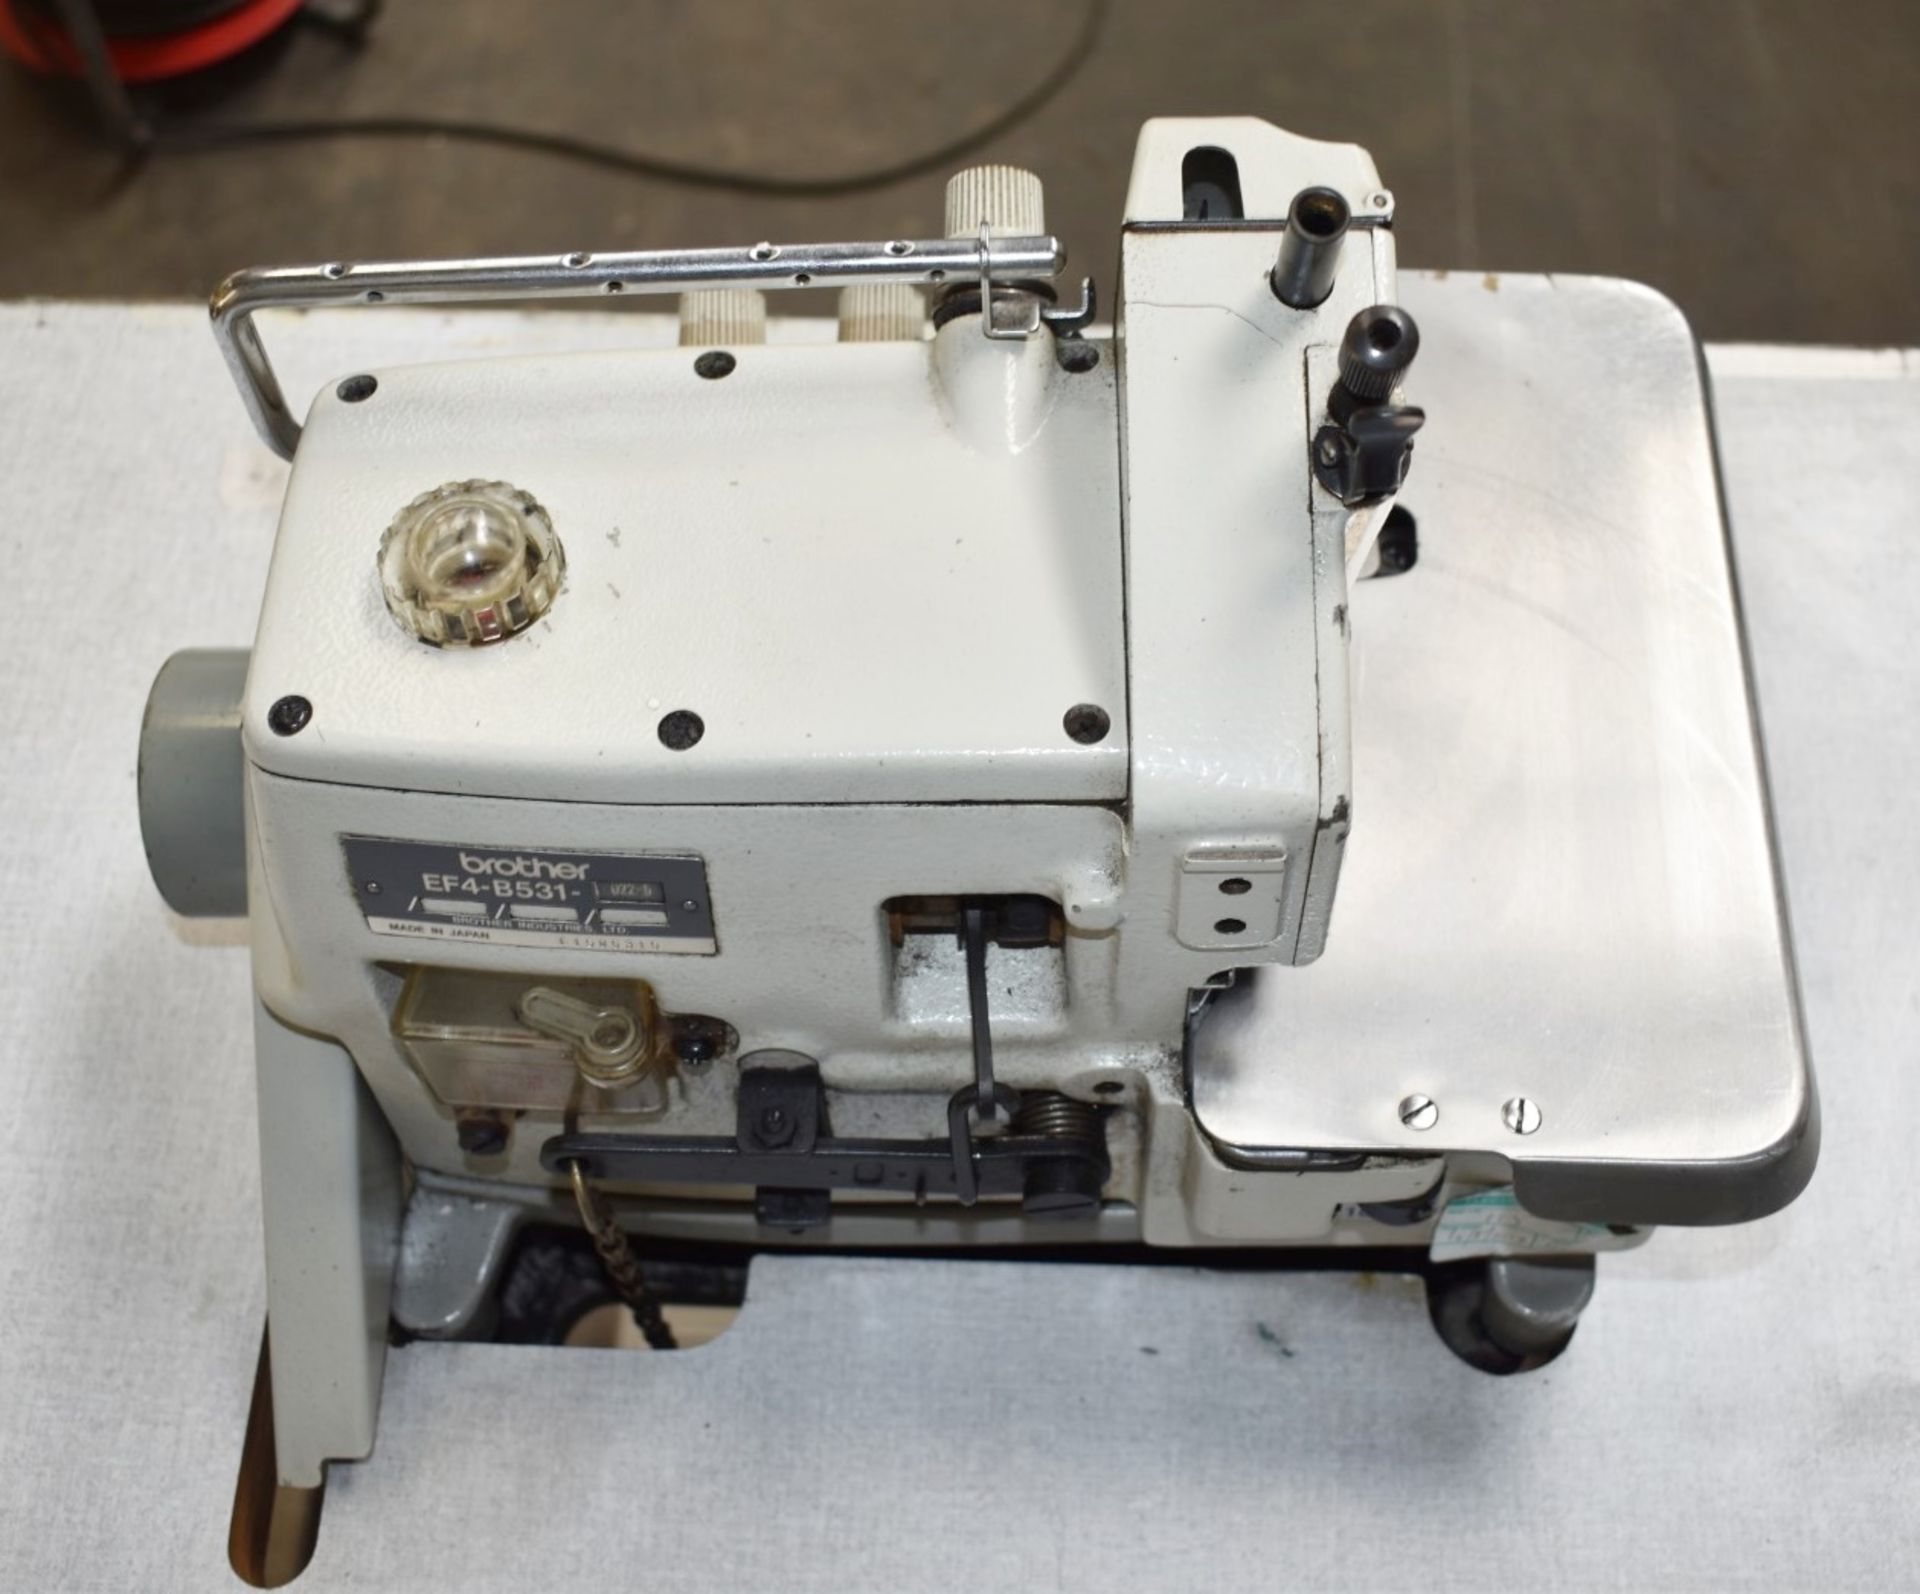 1 x Brother Overlock Industrial Sewing Machine - Model EF4-B531 - Image 20 of 27